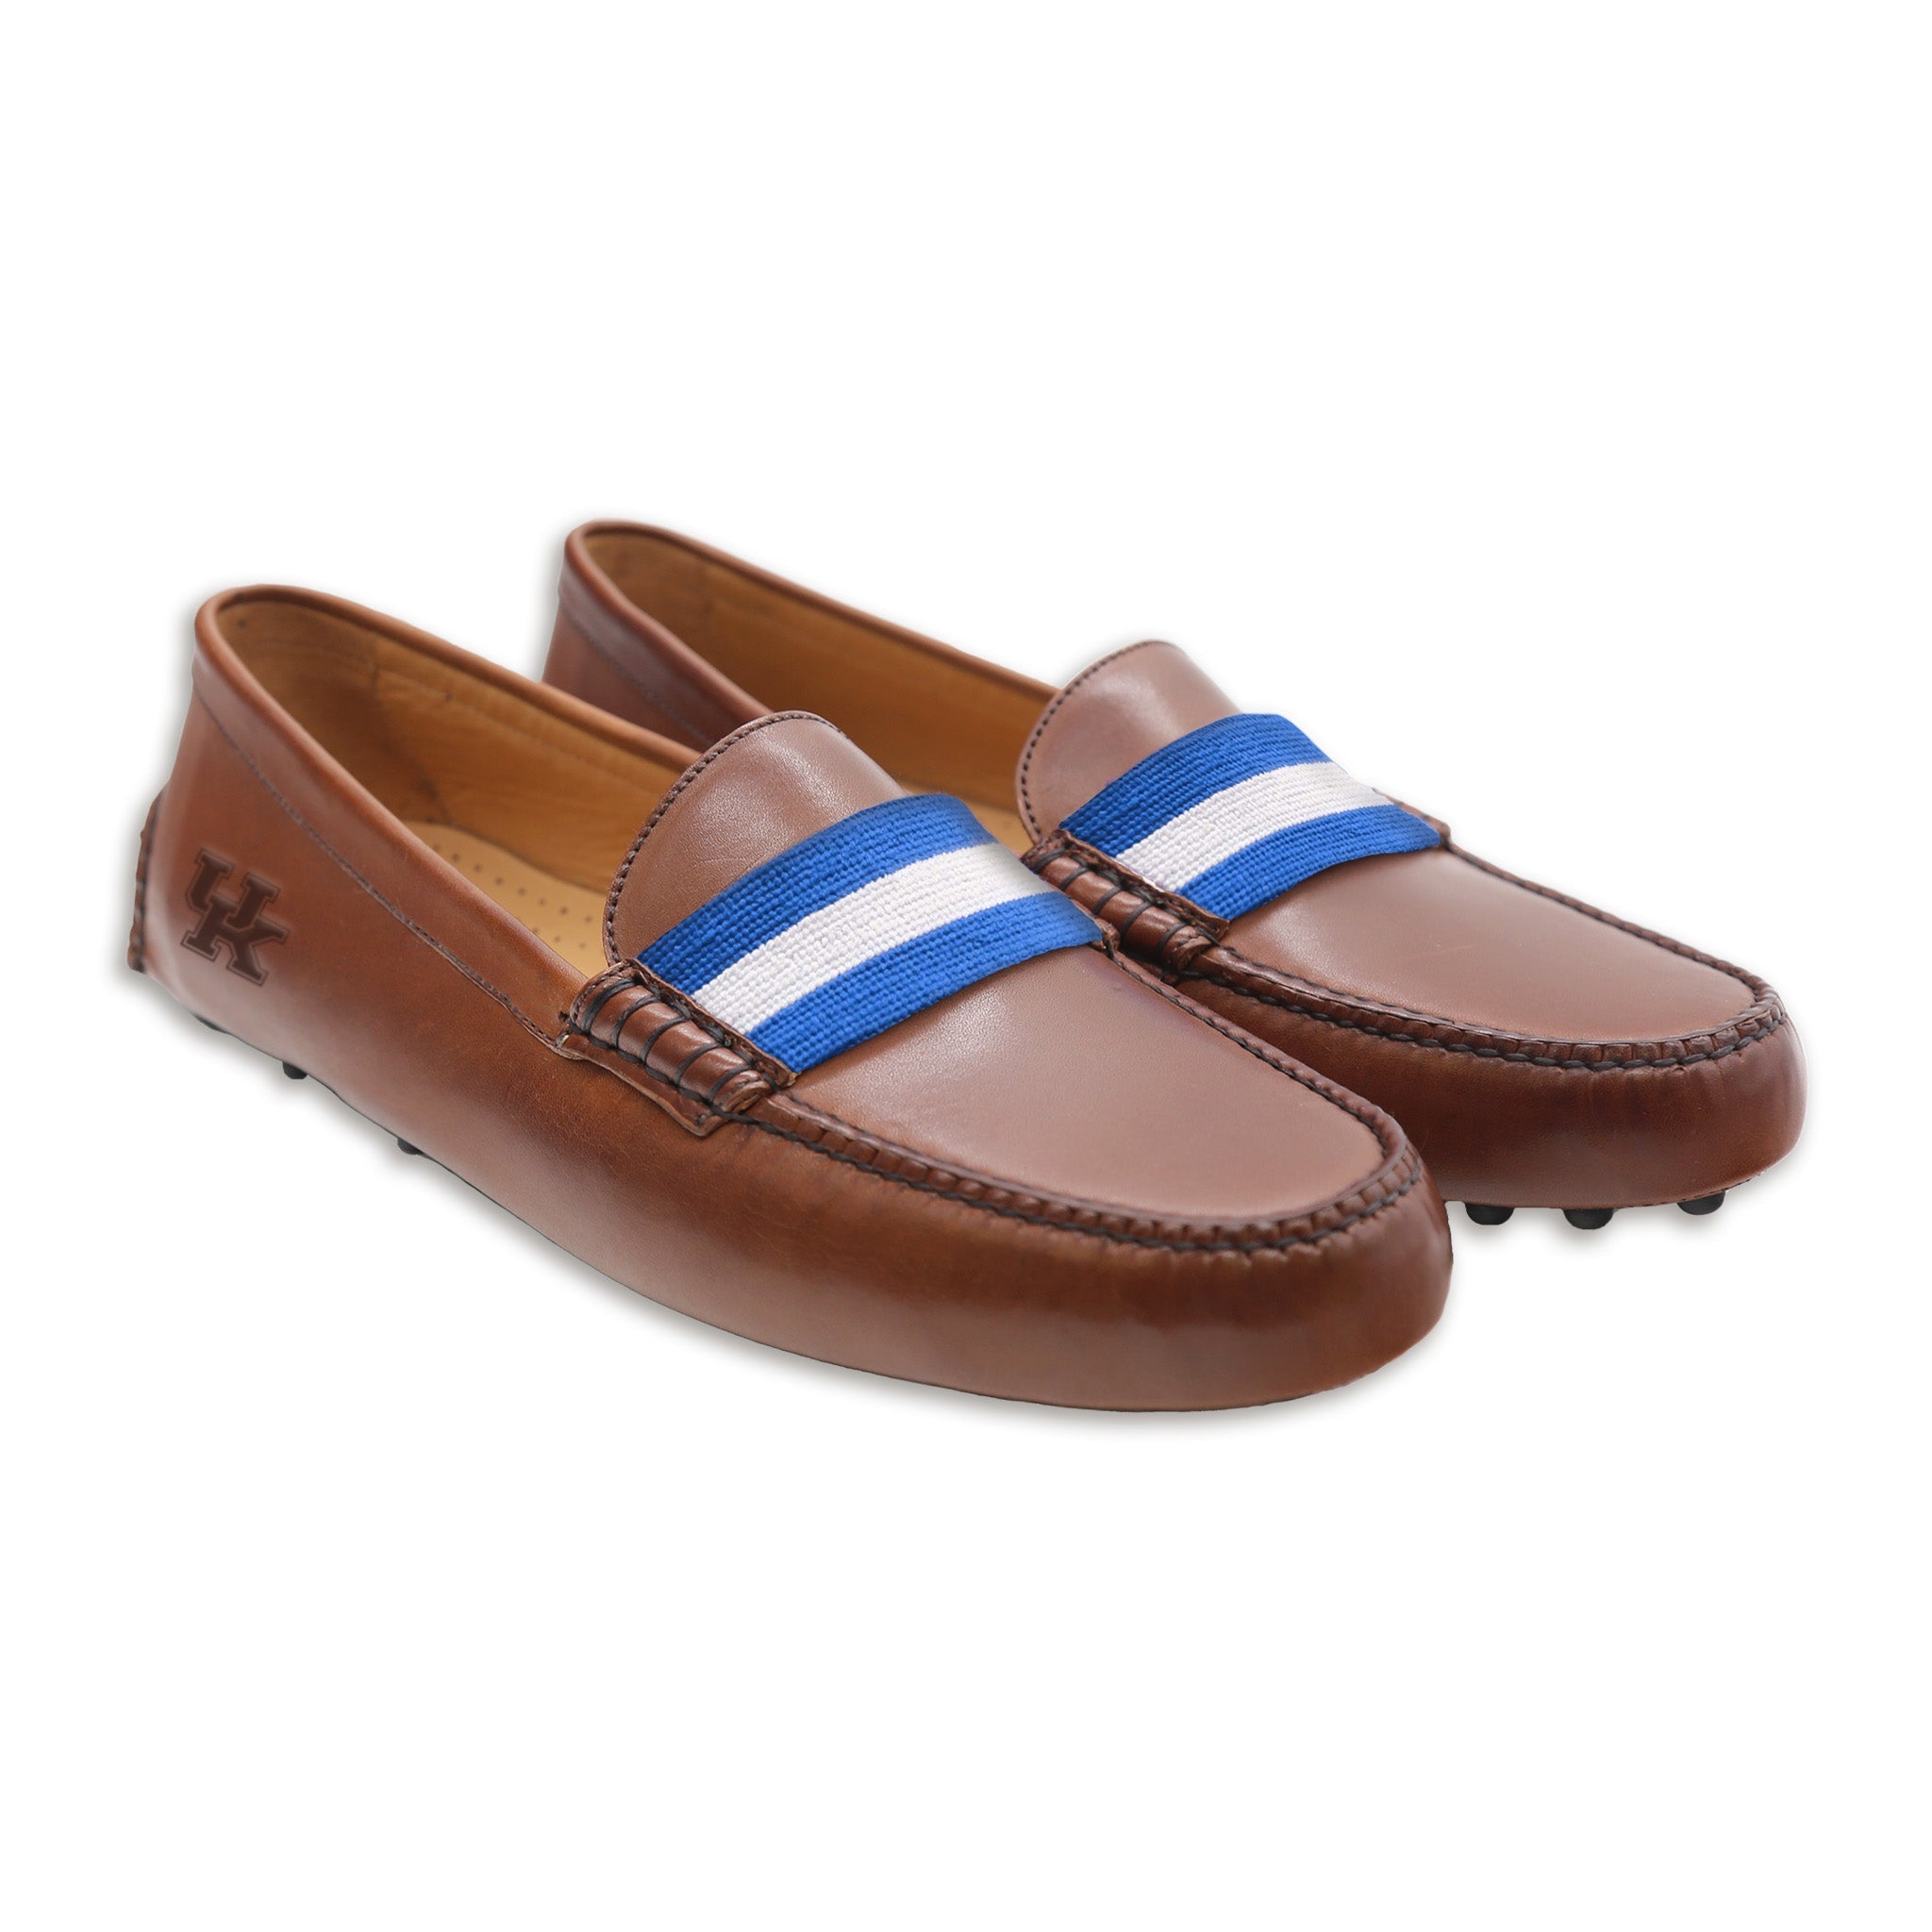 – Kentucky Leather-Logo) (Blue-White) Branson Driving Smathers & Surcingle (Chestnut Shoes